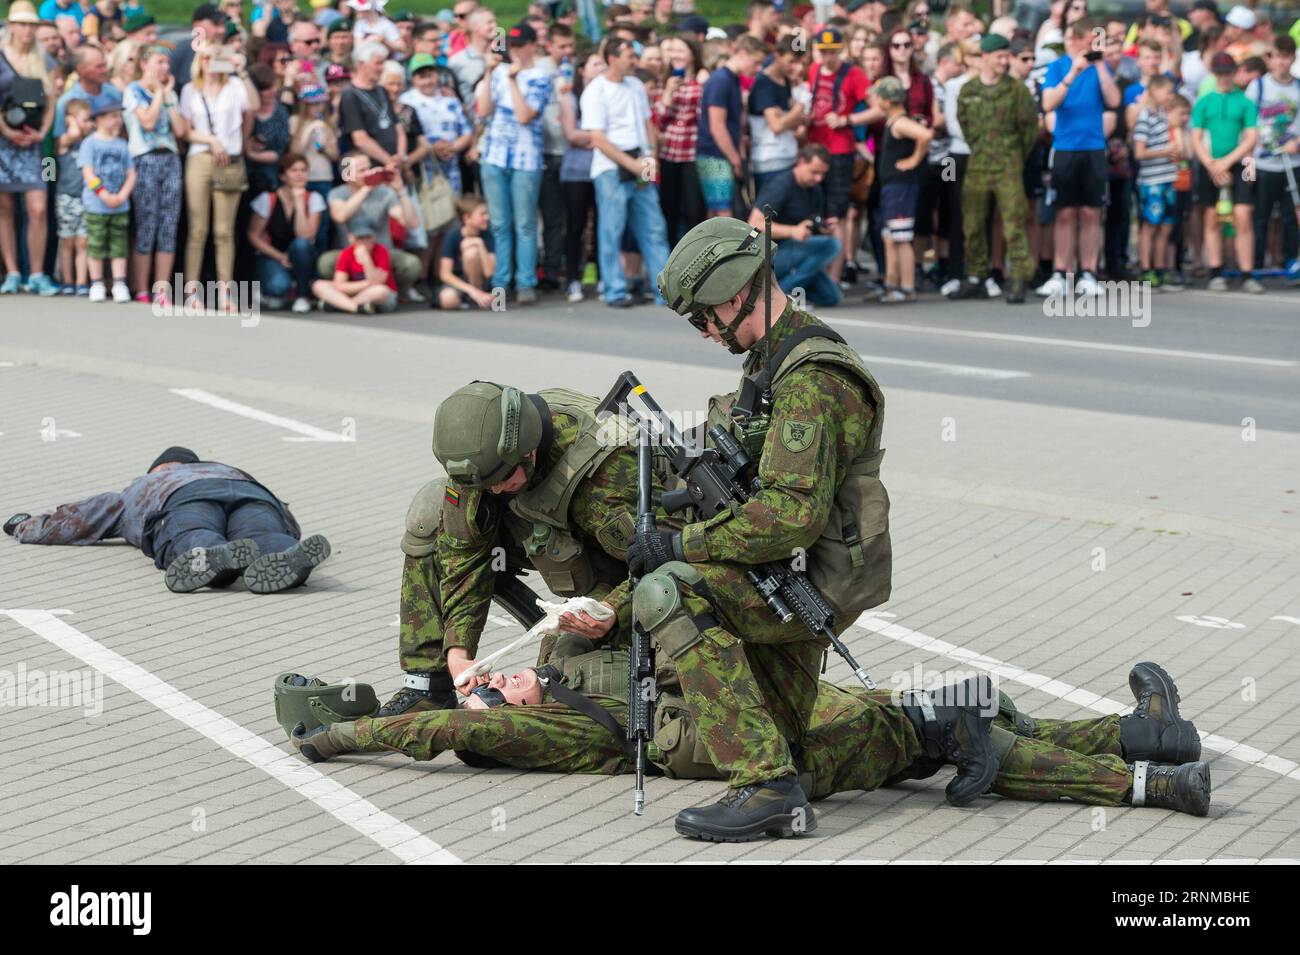 (170520) -- VILNIUS, May 20, 2017 -- Soldiers show the public how to rescue the wounded in Panevezys, northern city of Lithuania, May 20, 2017. Lithuania celebrated Armed Forces and Public Unity Day in northern city of Panevezys on Saturday. ) LITHUANIA-PANEVEZYS-ARMED FORCES AND PUBLIC UNITY DAY AlfredasxPliadis PUBLICATIONxNOTxINxCHN   Vilnius May 20 2017 Soldiers Show The Public How to Rescue The Wounded in Panevezys Northern City of Lithuania May 20 2017 Lithuania celebrated Armed Forces and Public Unity Day in Northern City of Panevezys ON Saturday Lithuania Panevezys Armed Forces and Pub Stock Photo